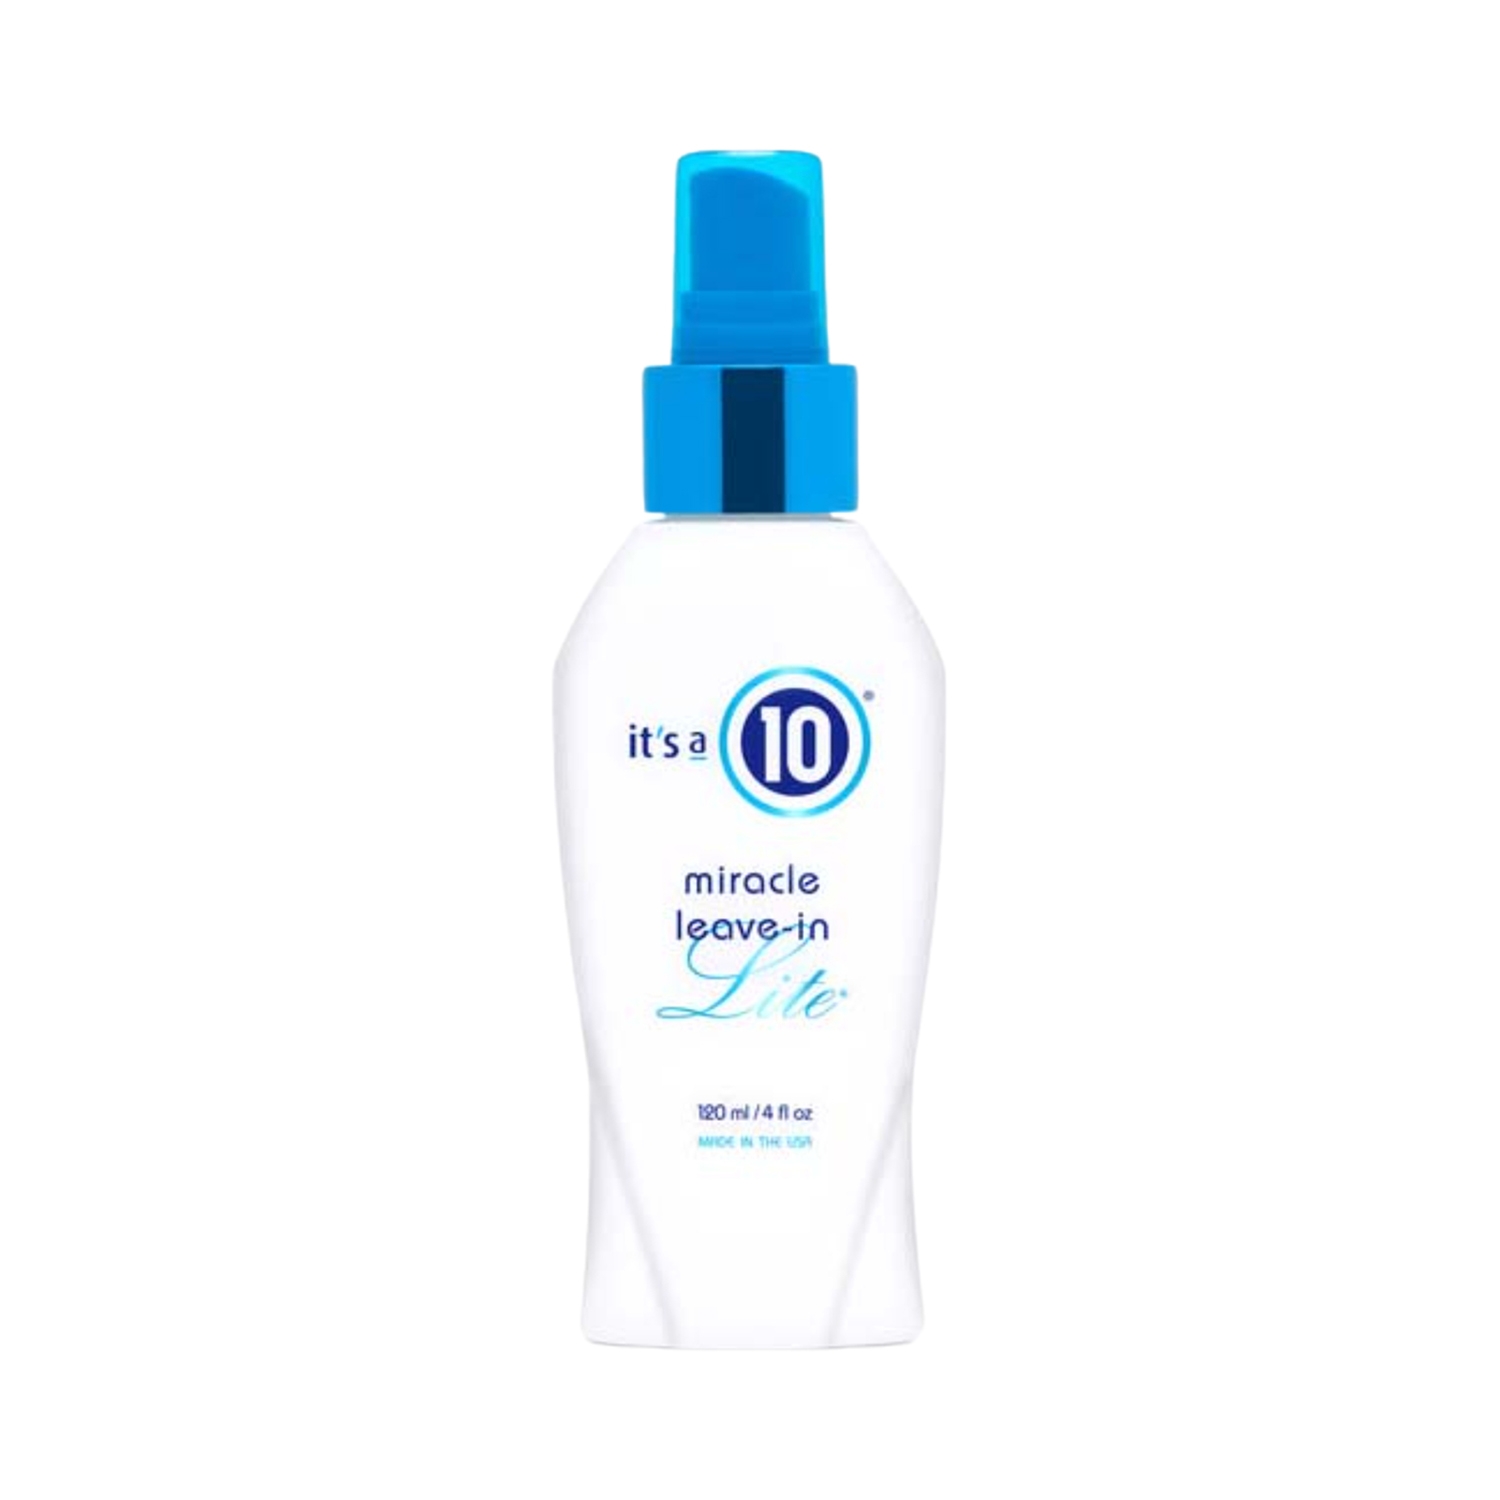 It's a 10 Haircare | It's a 10 Haircare Miracle Leave In Lite (120ml)